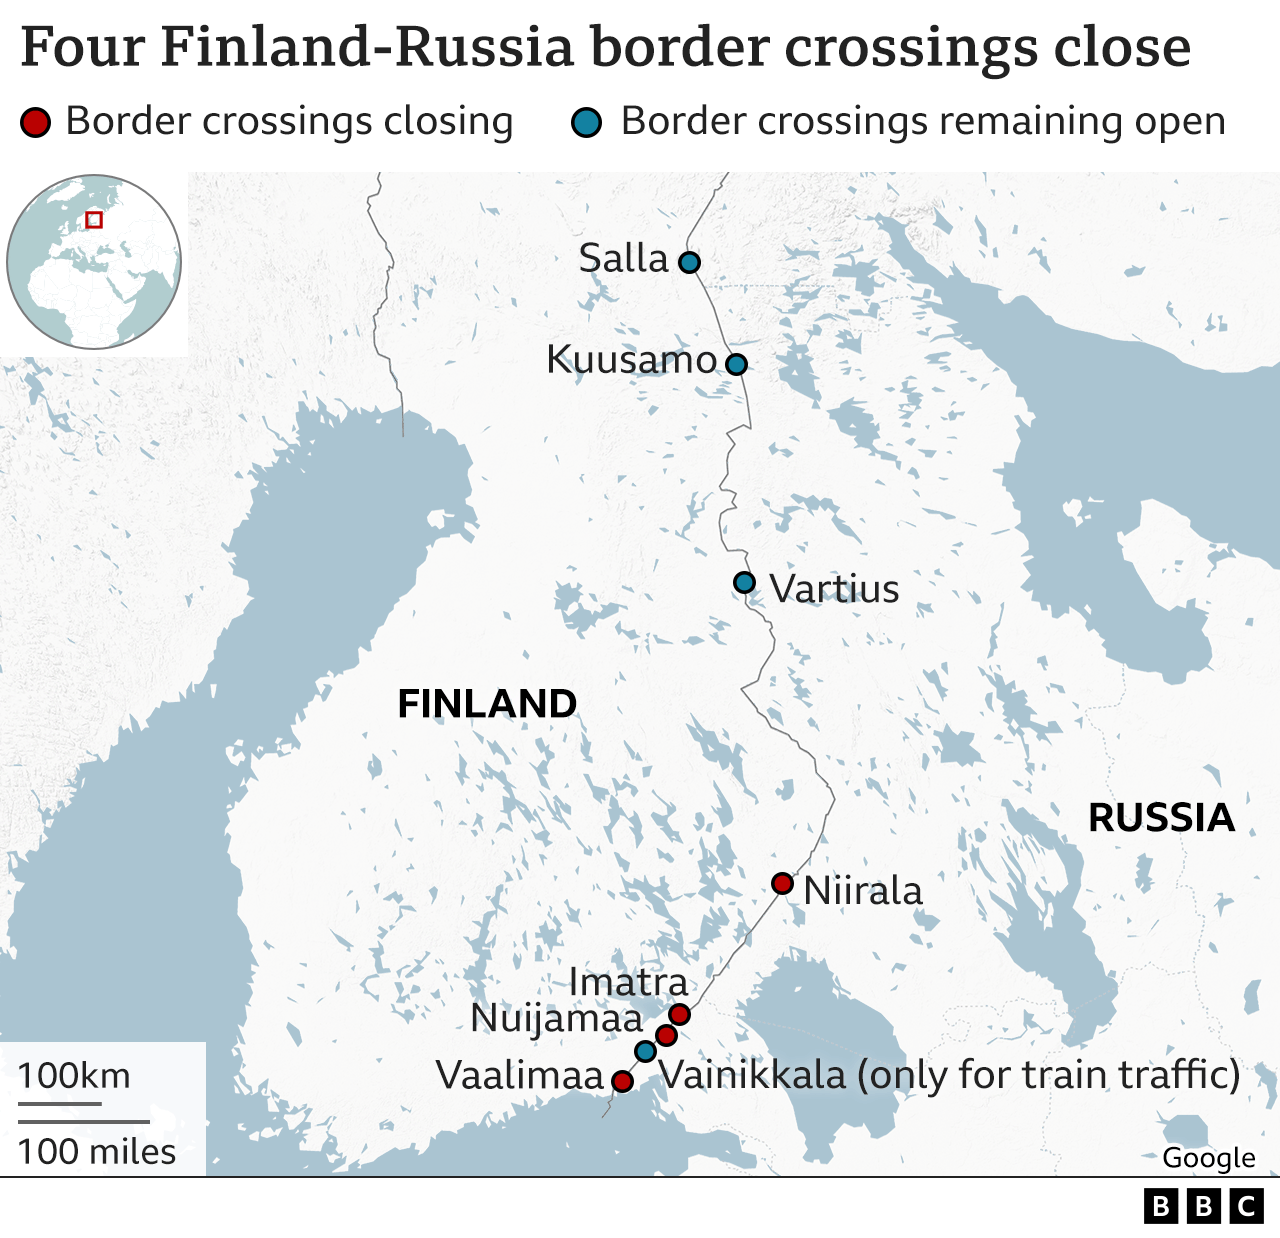 Finland closes four crossing points on Russia border - BBC News